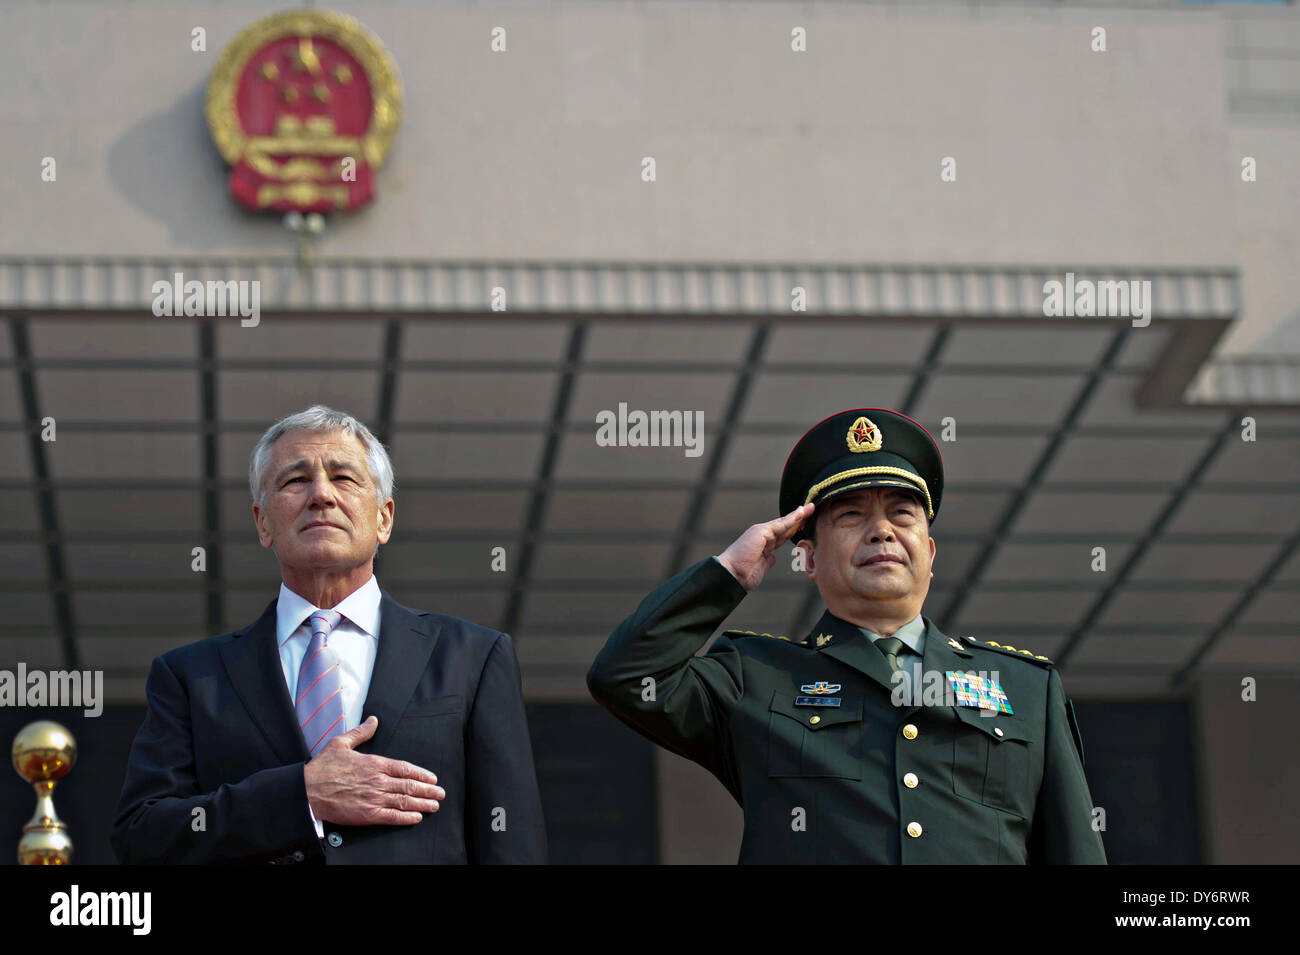 US Secretary of Defense Chuck Hagel with Chinese Minister of Defense Chang Wanquan at an honors ceremony April 8, 2014 in Beijing, China. Stock Photo